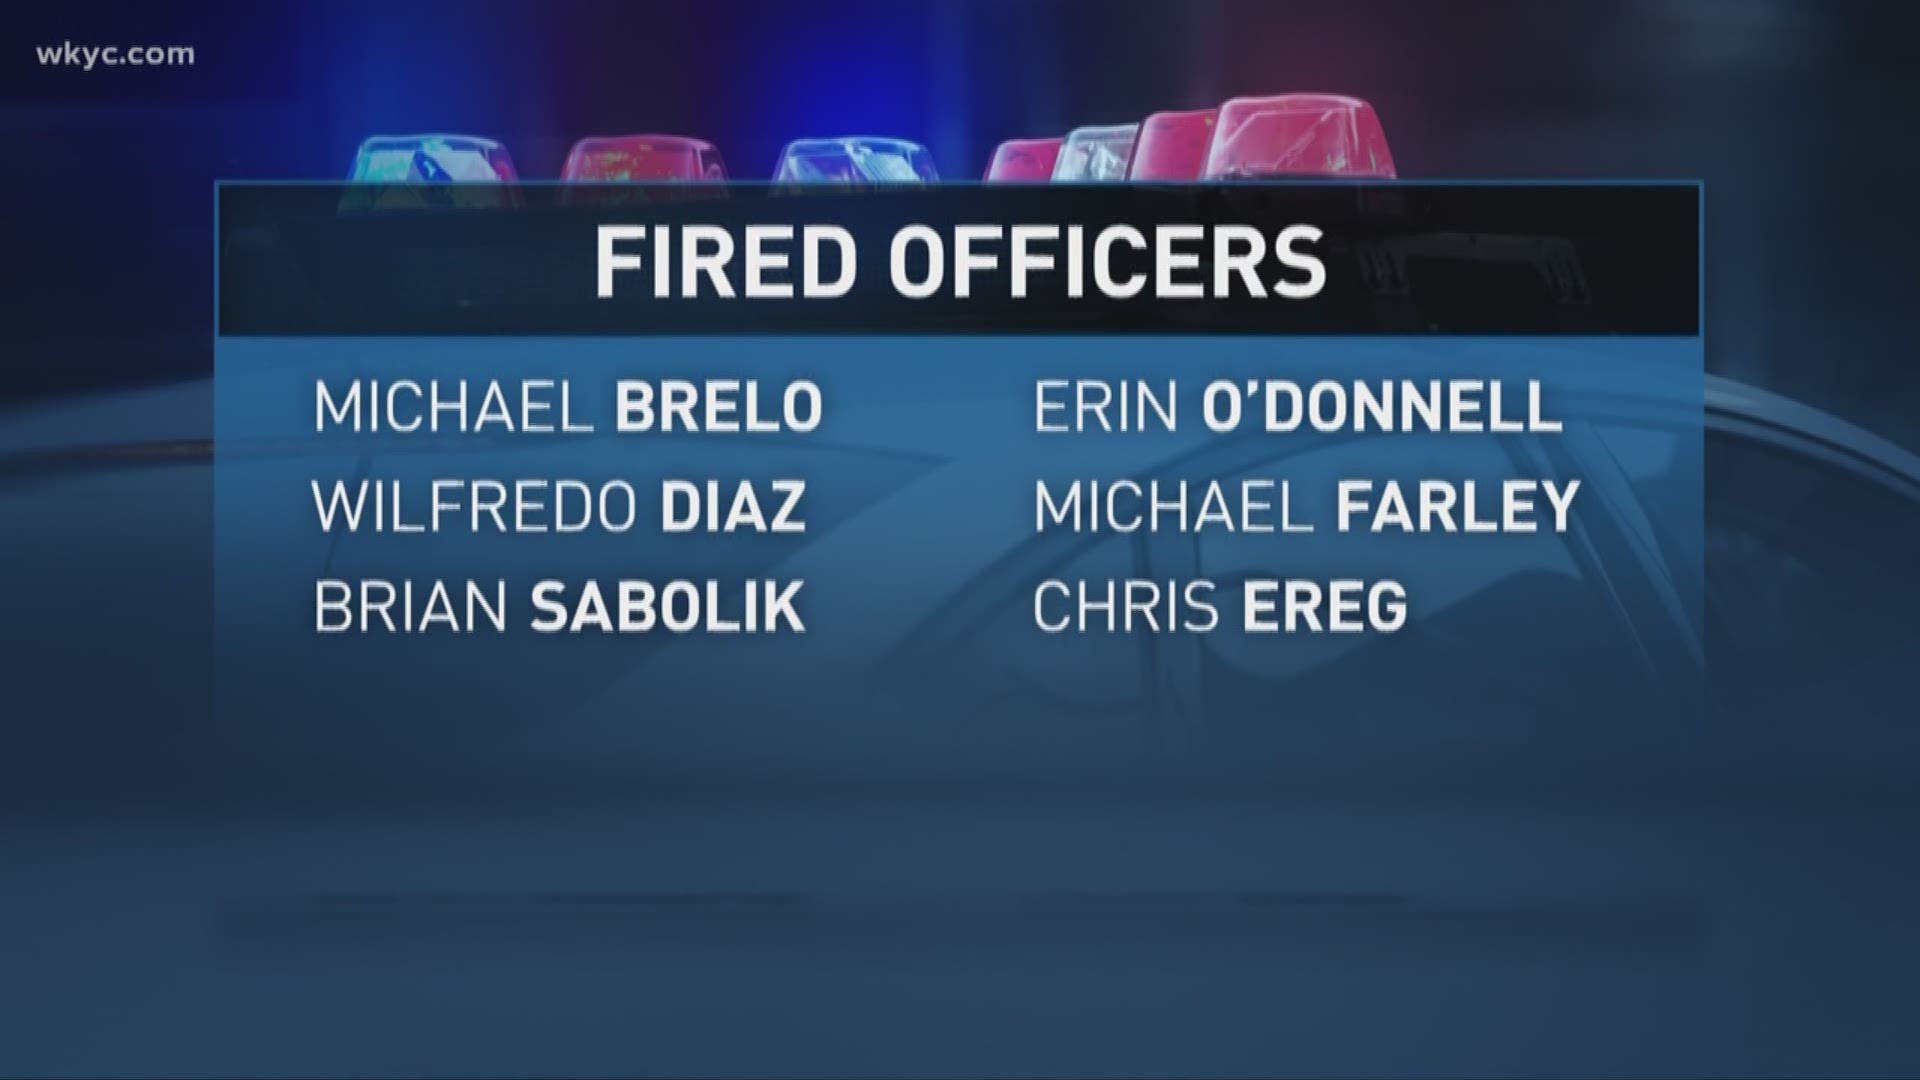 Cleveland Police officers reinstated after controversial case